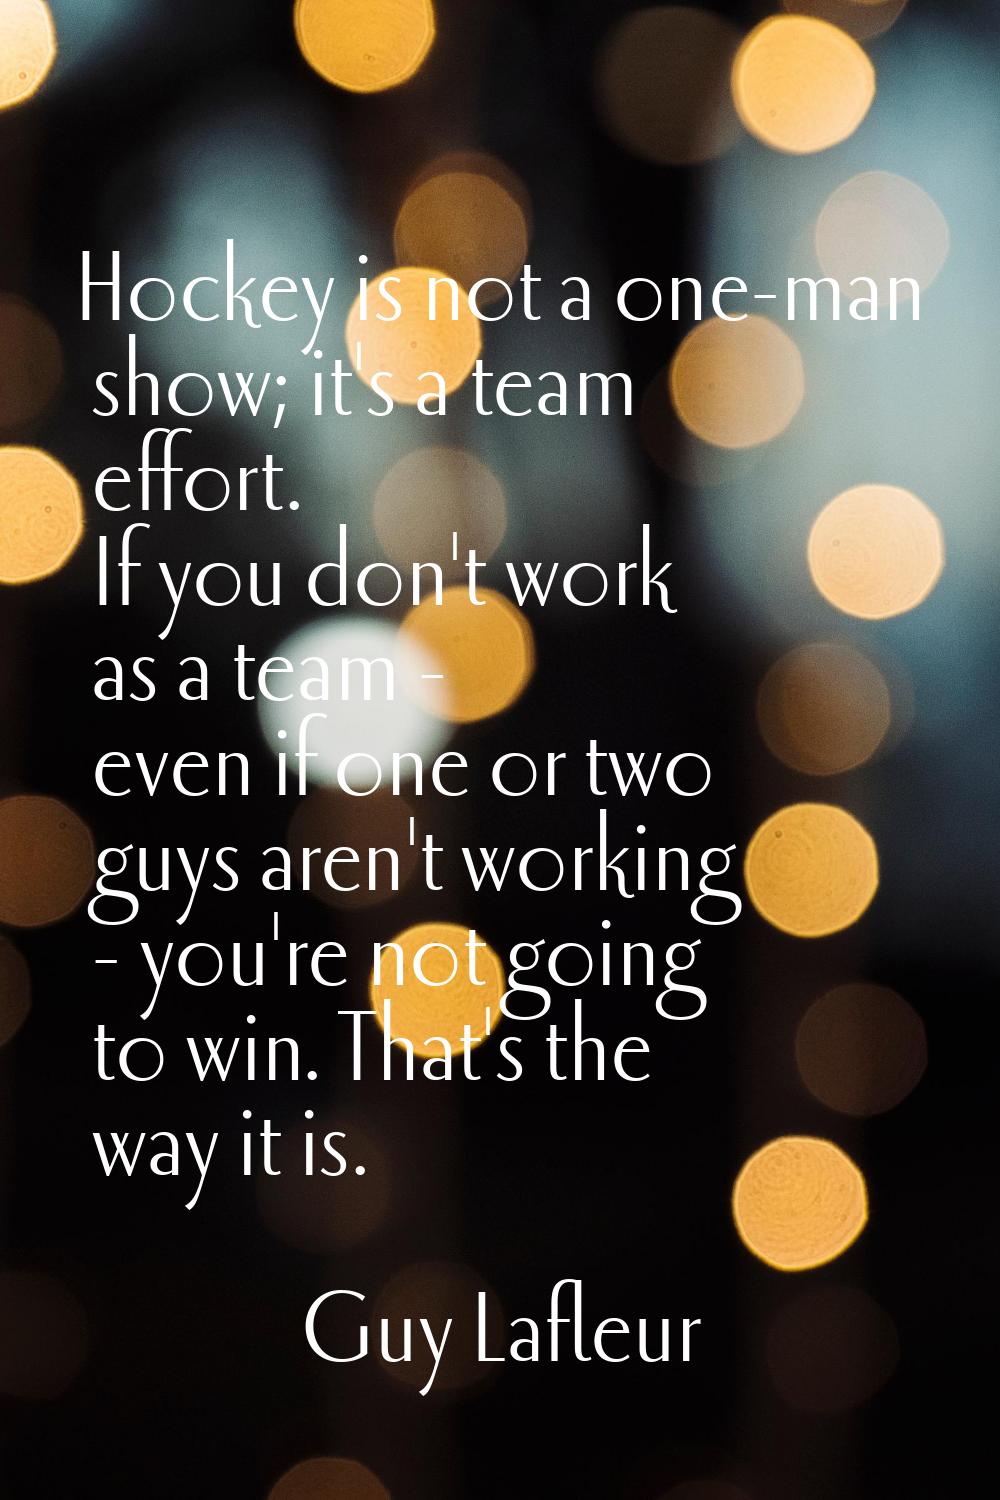 Hockey is not a one-man show; it's a team effort. If you don't work as a team - even if one or two 